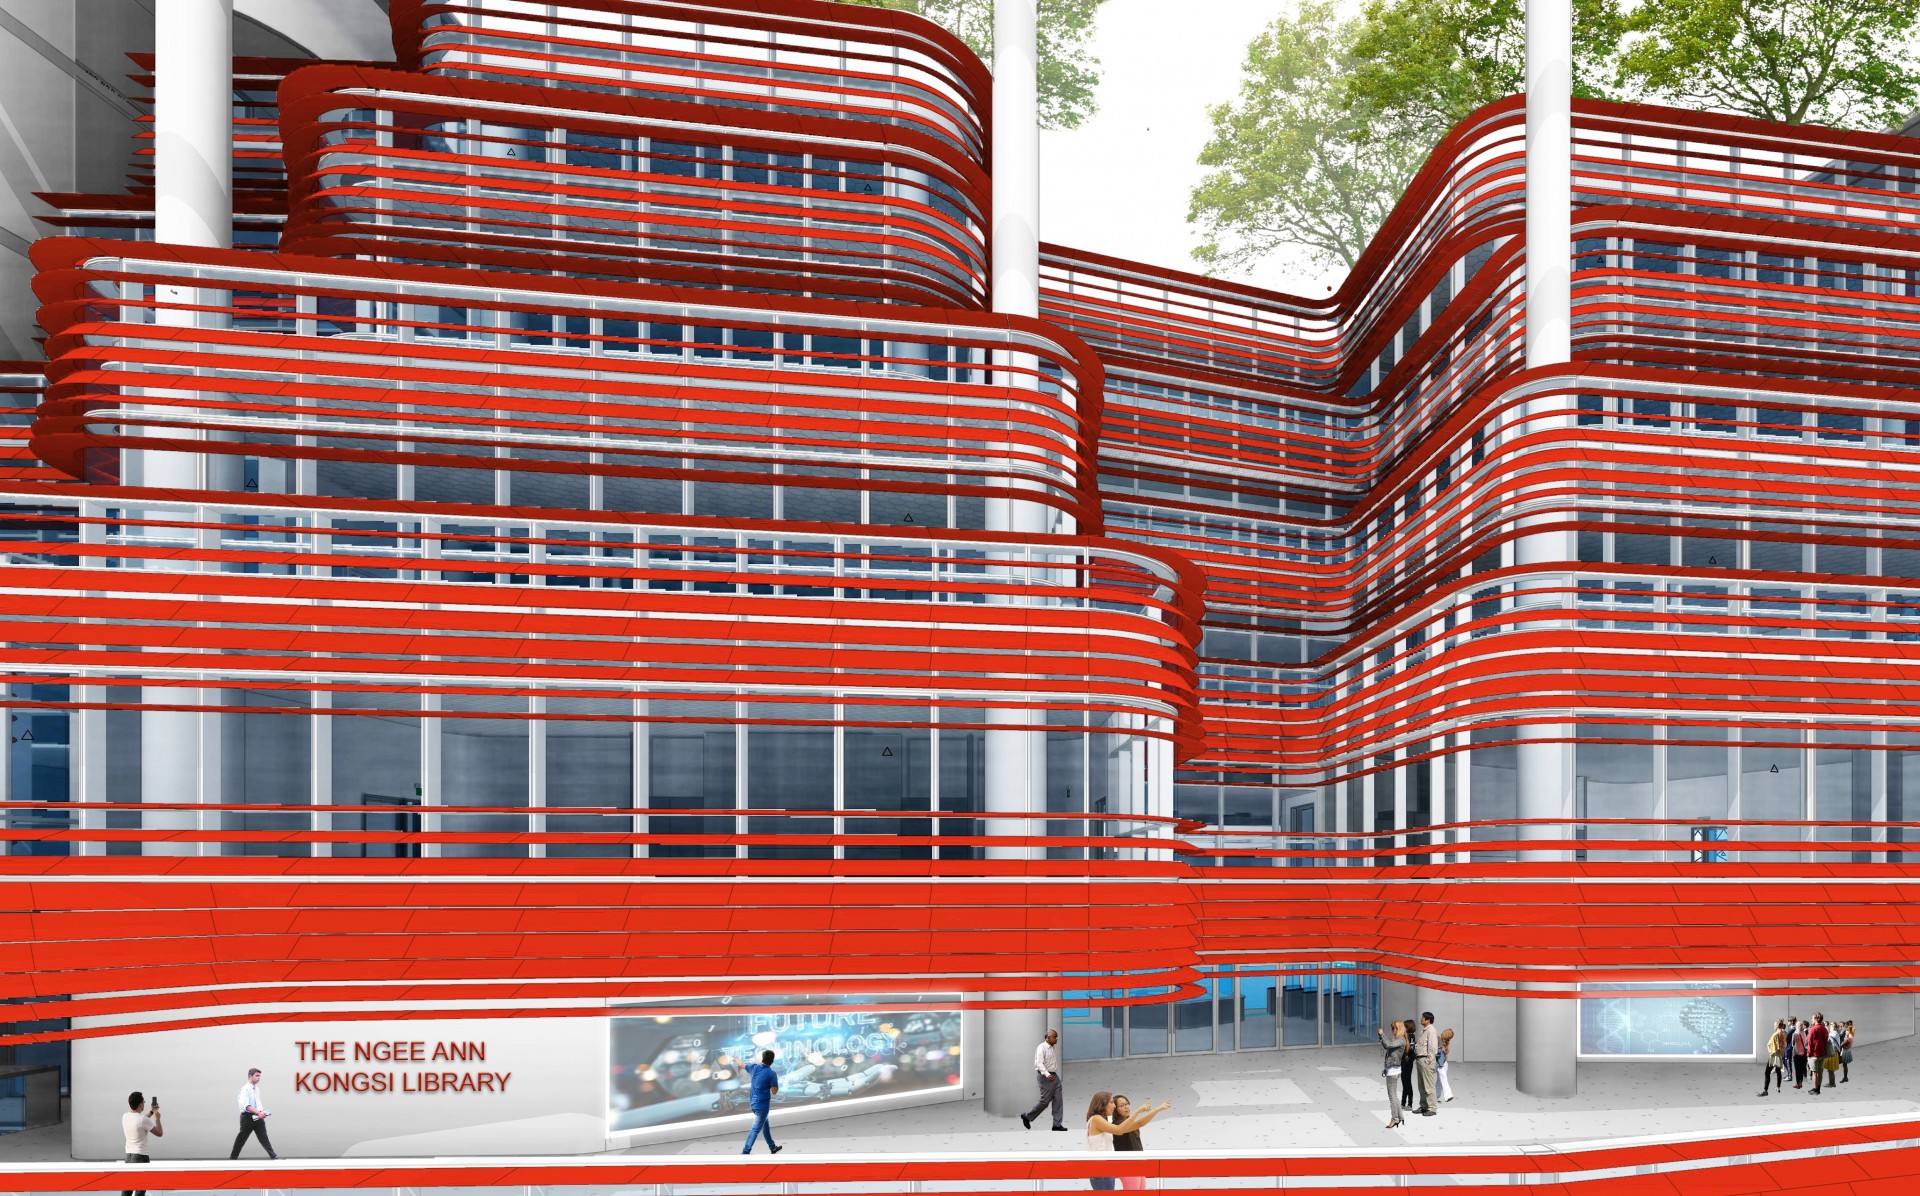 An artist's impression of The Ngee Ann Kongsi Library in SIT's future Punggol campus.